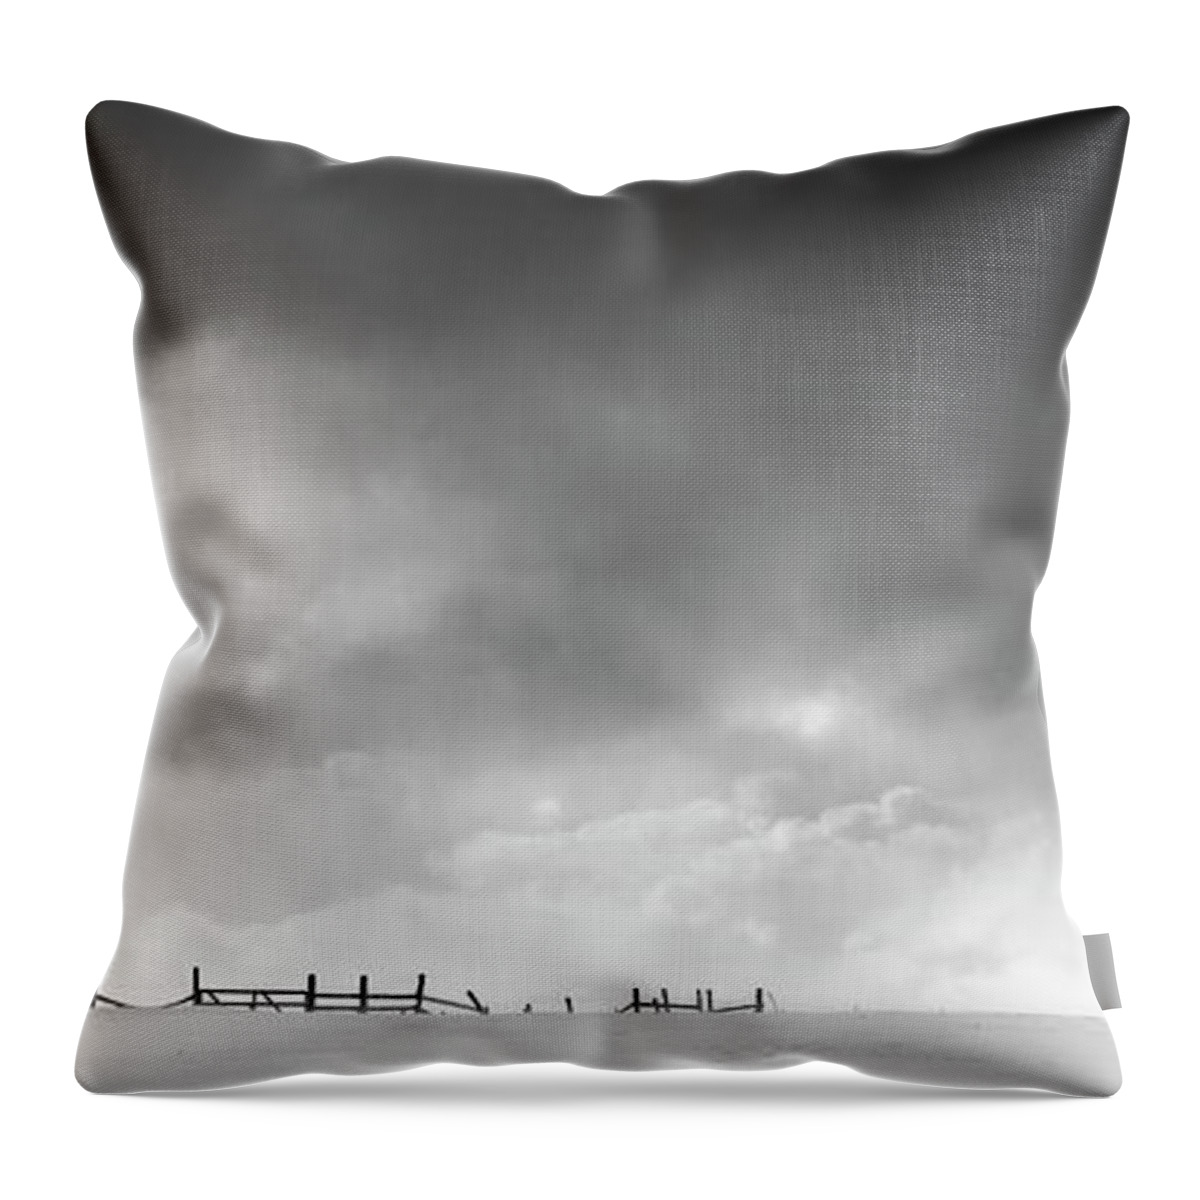 Horse Throw Pillow featuring the photograph Horses And Wooden Fence In Snowy by Chris Clor